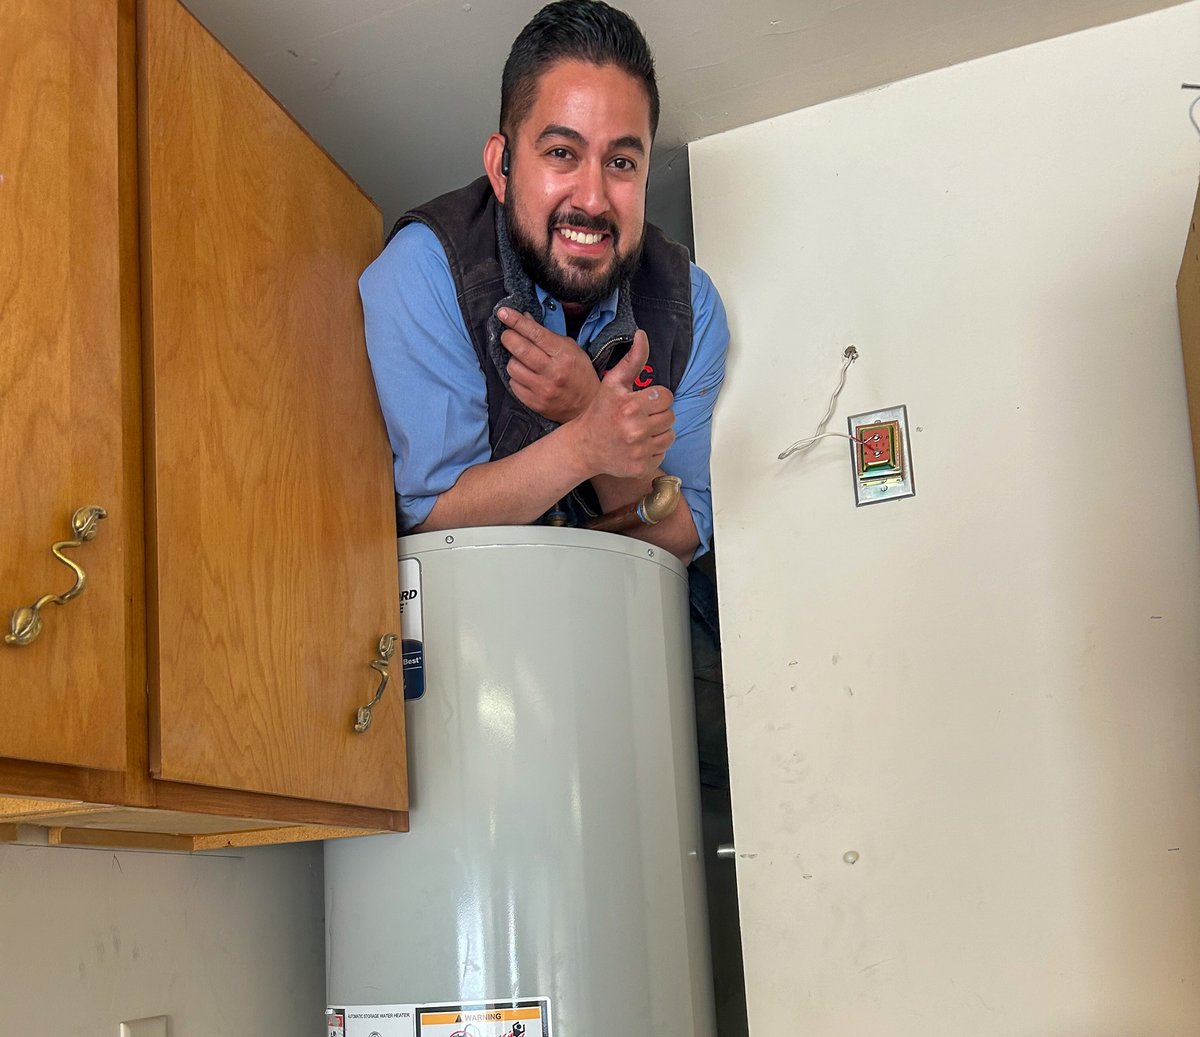 If you're not having fun on the job, just go to work with Ivan. 😂 #TLCPlumbing #WaterHeater #NoSweat #Plumber